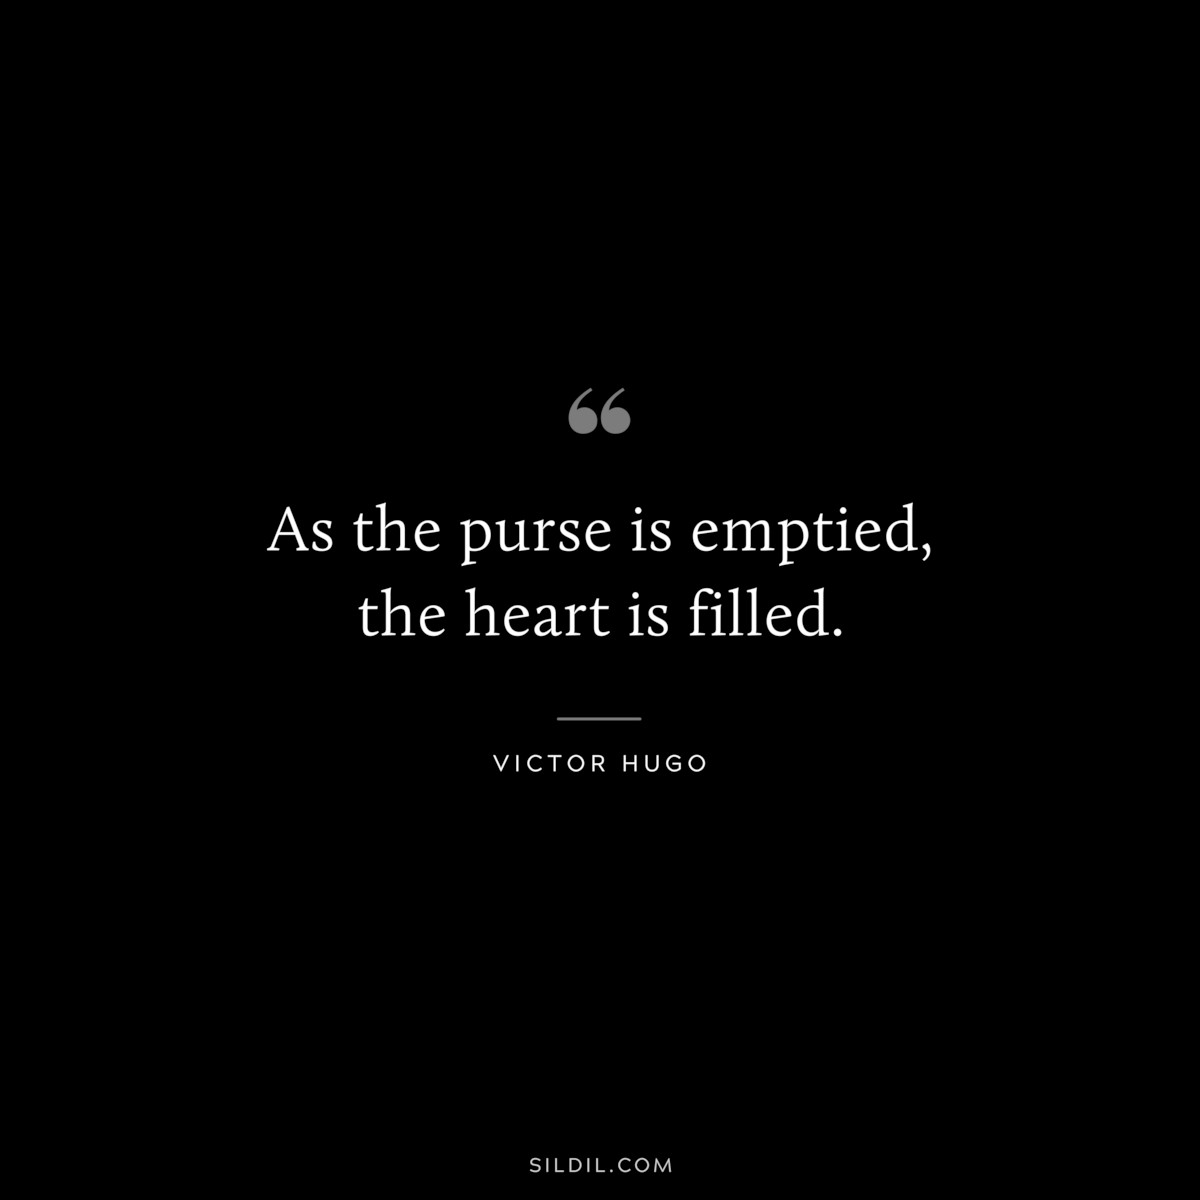 As the purse is emptied, the heart is filled.― Victor Hugo